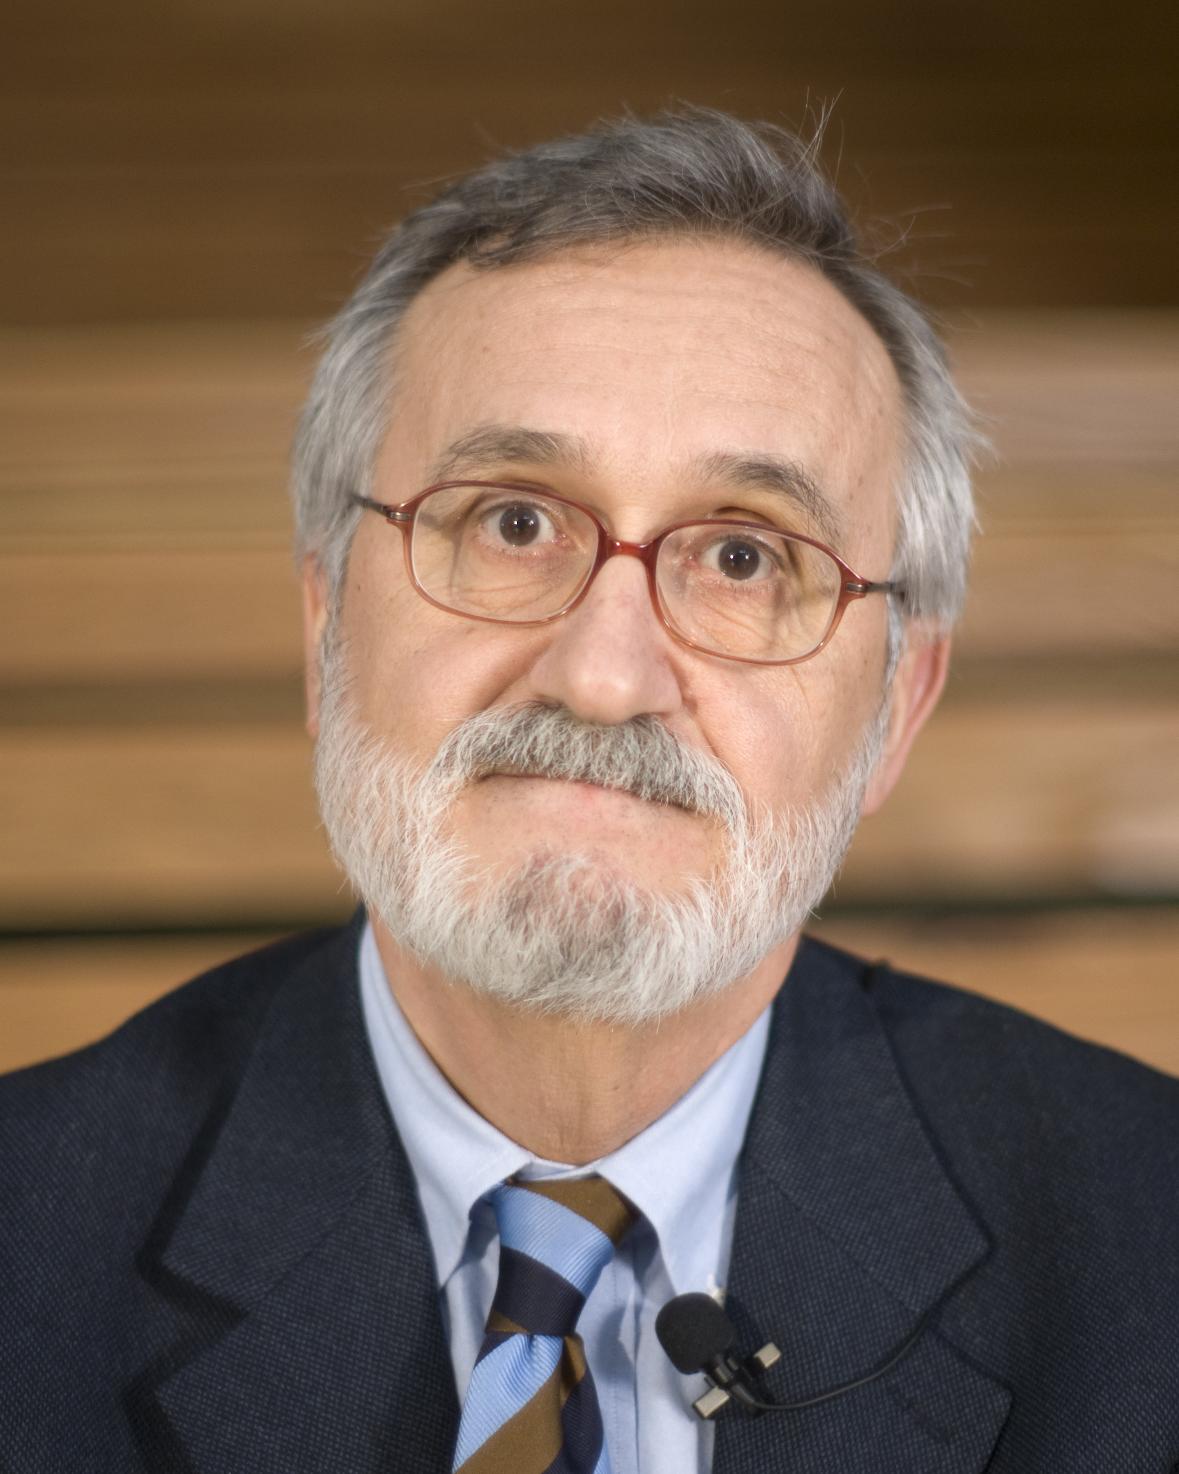 a man with glasses and a white beard